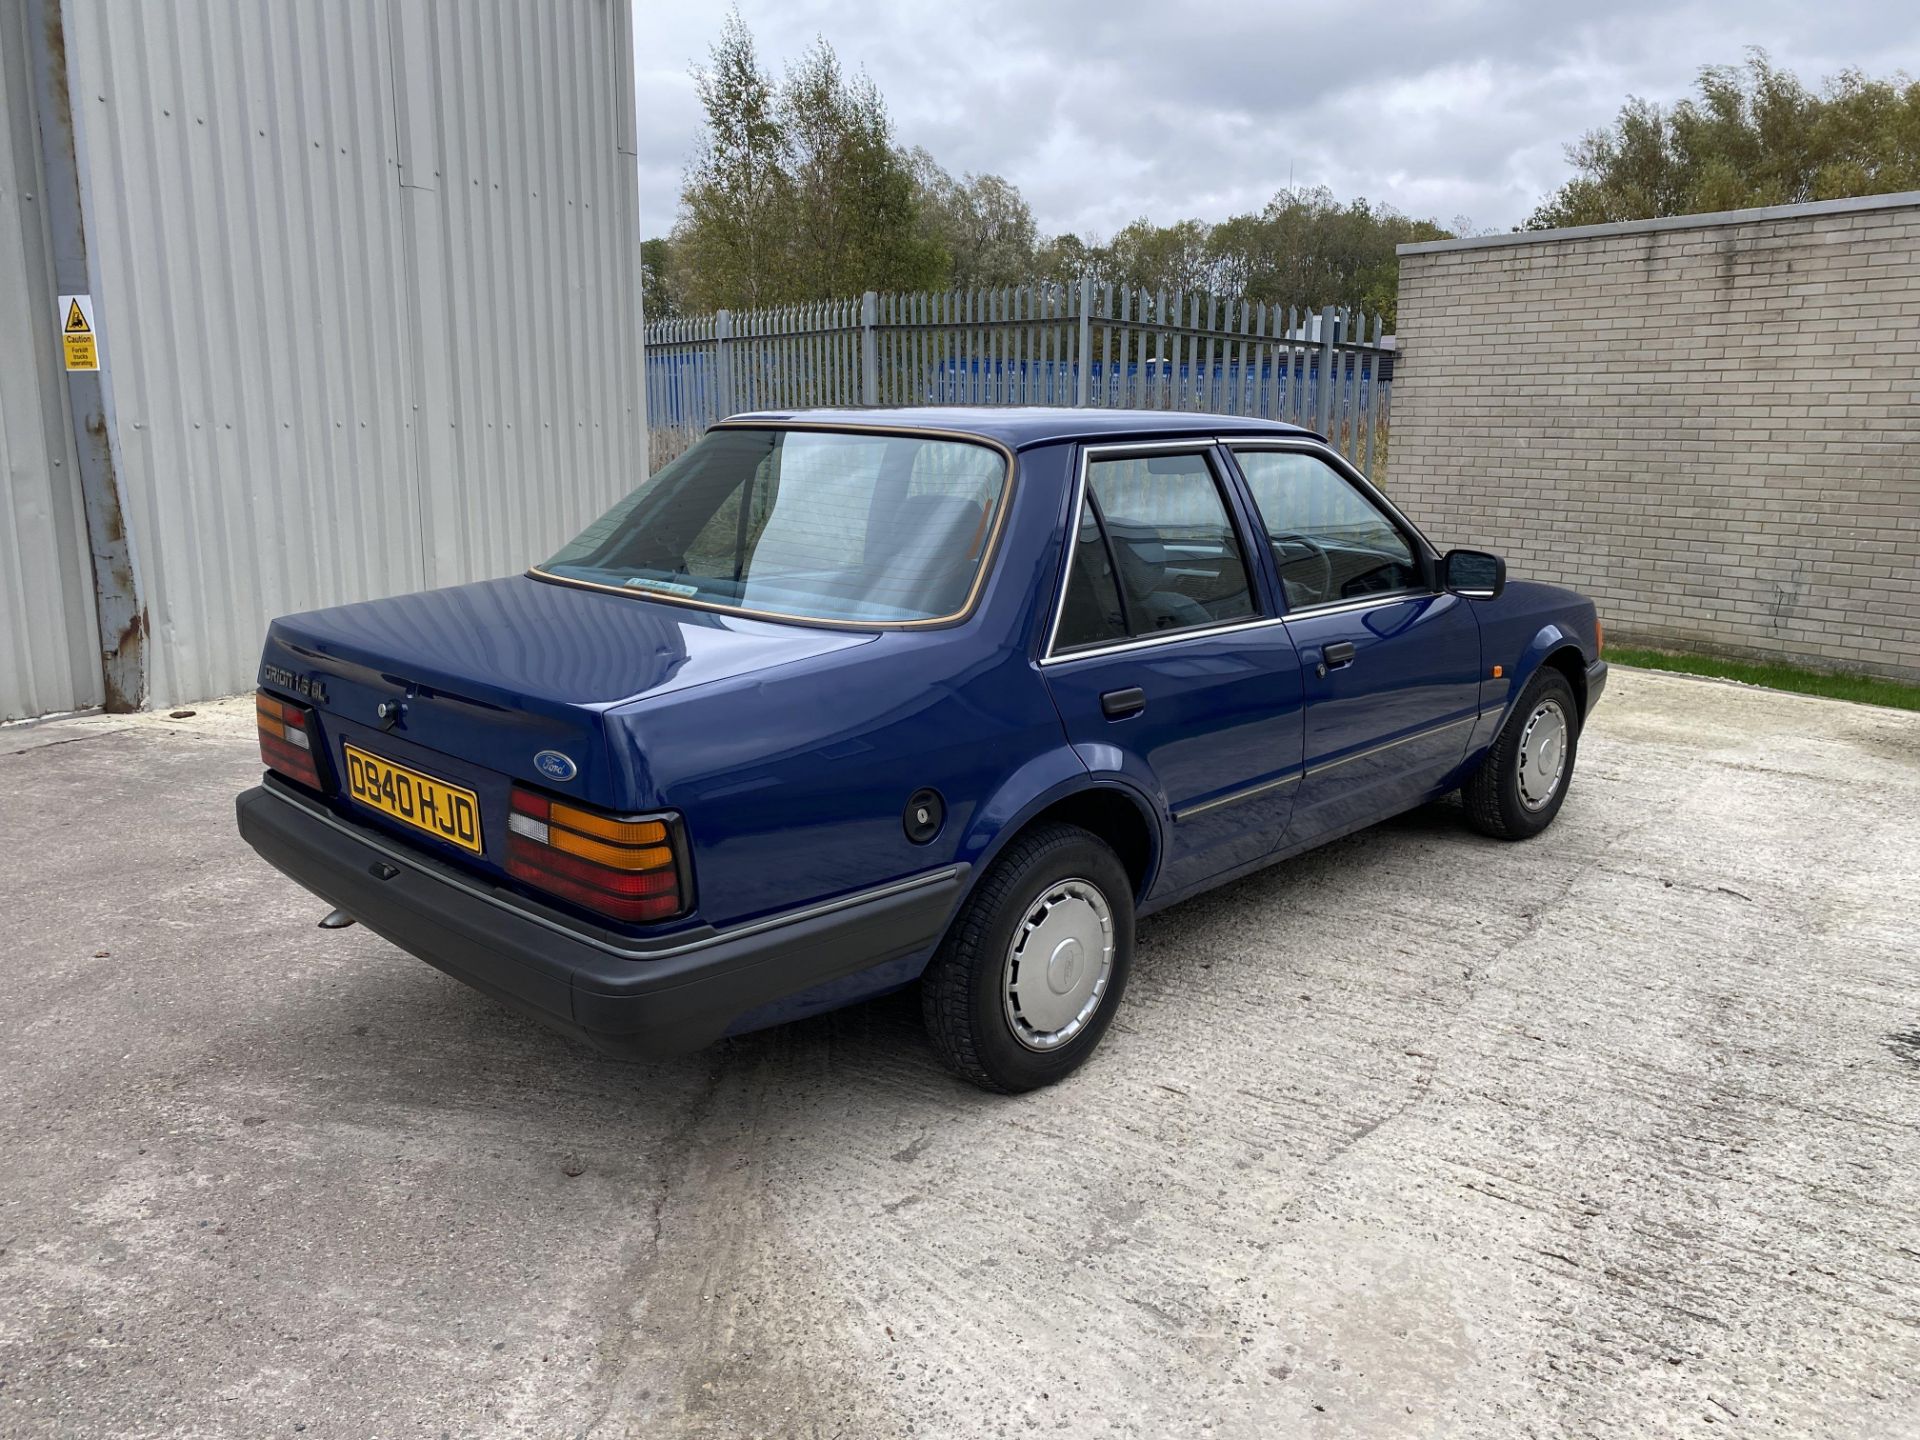 Ford Orion 1.6 GL - Image 3 of 42